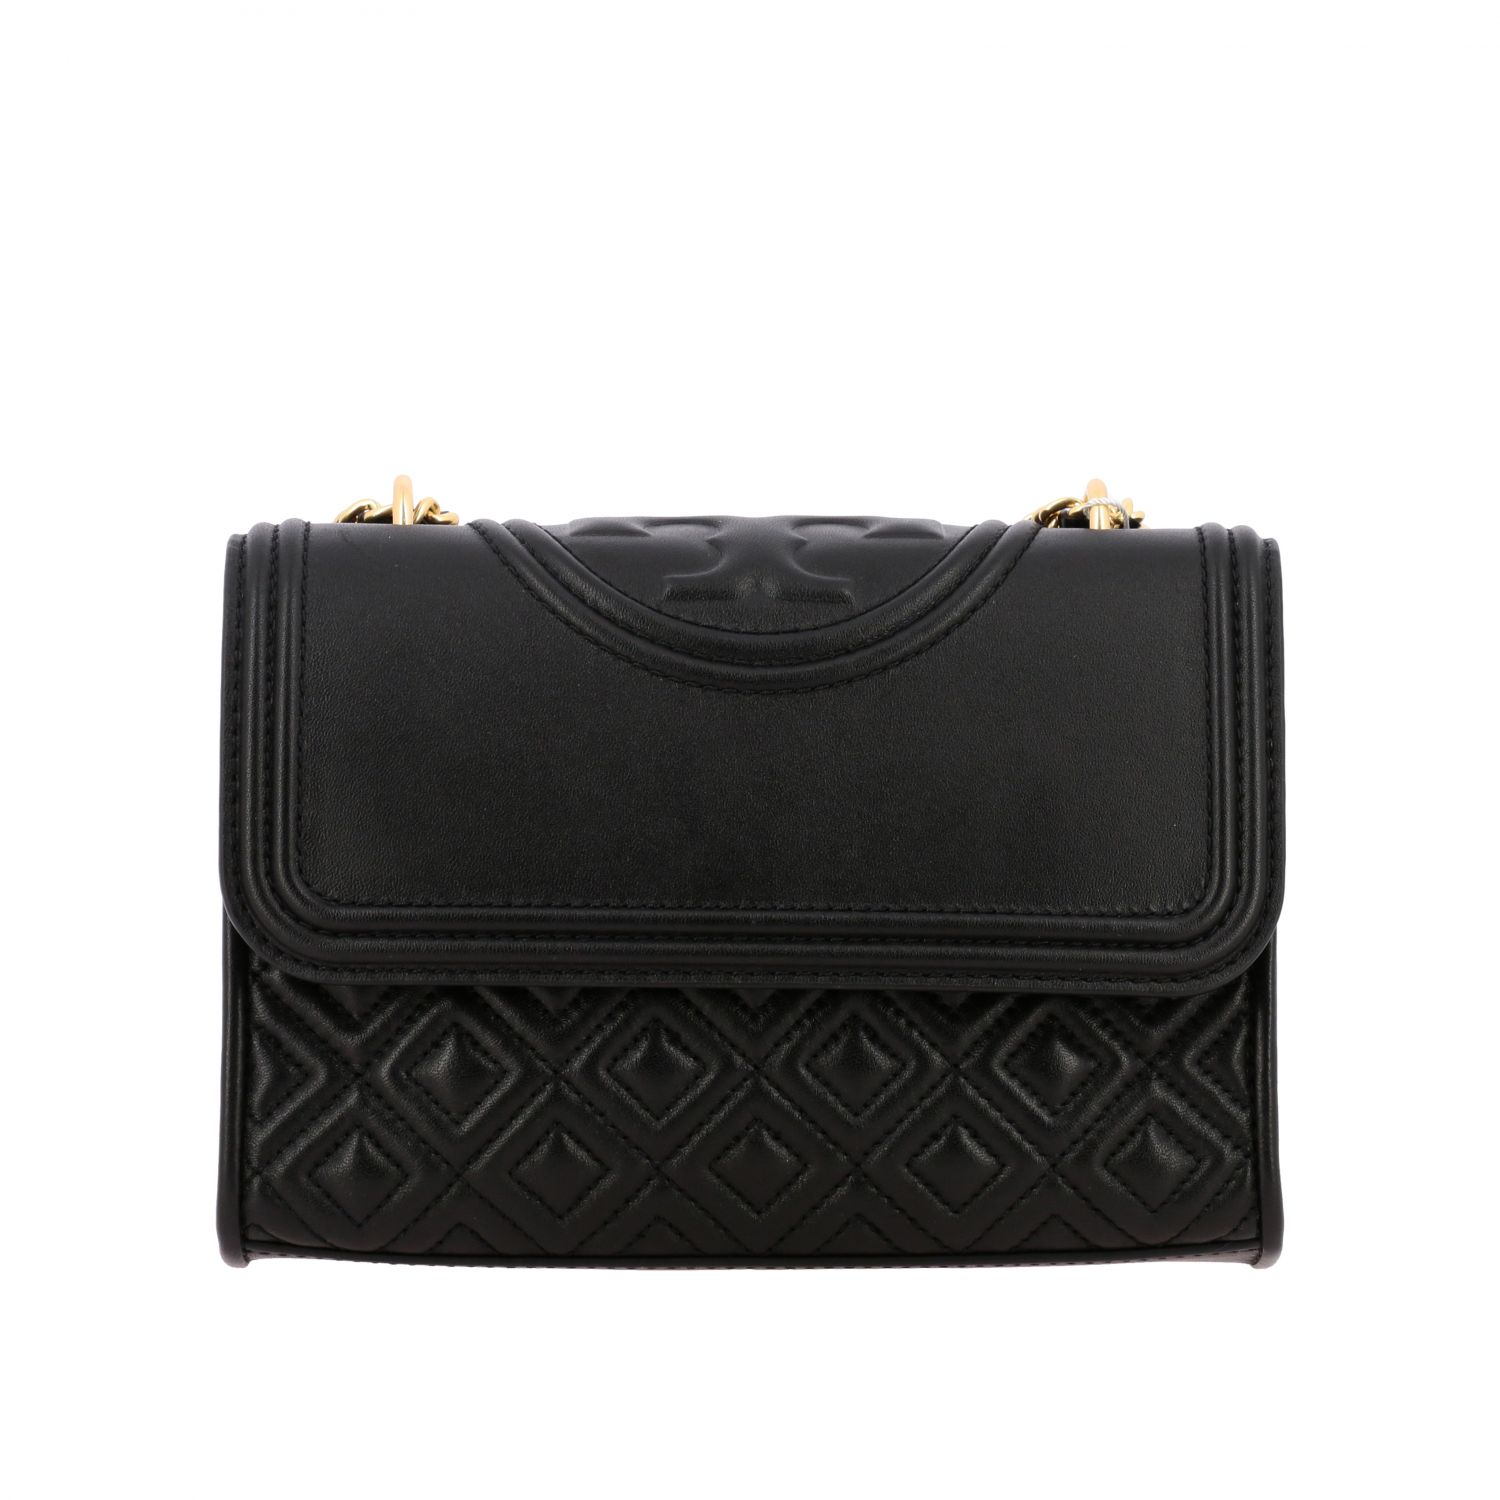 Tory Burch Outlet: shoulder bag in quilted leather with embossed emblem -  Black | Tory Burch crossbody bags 43834 online on 